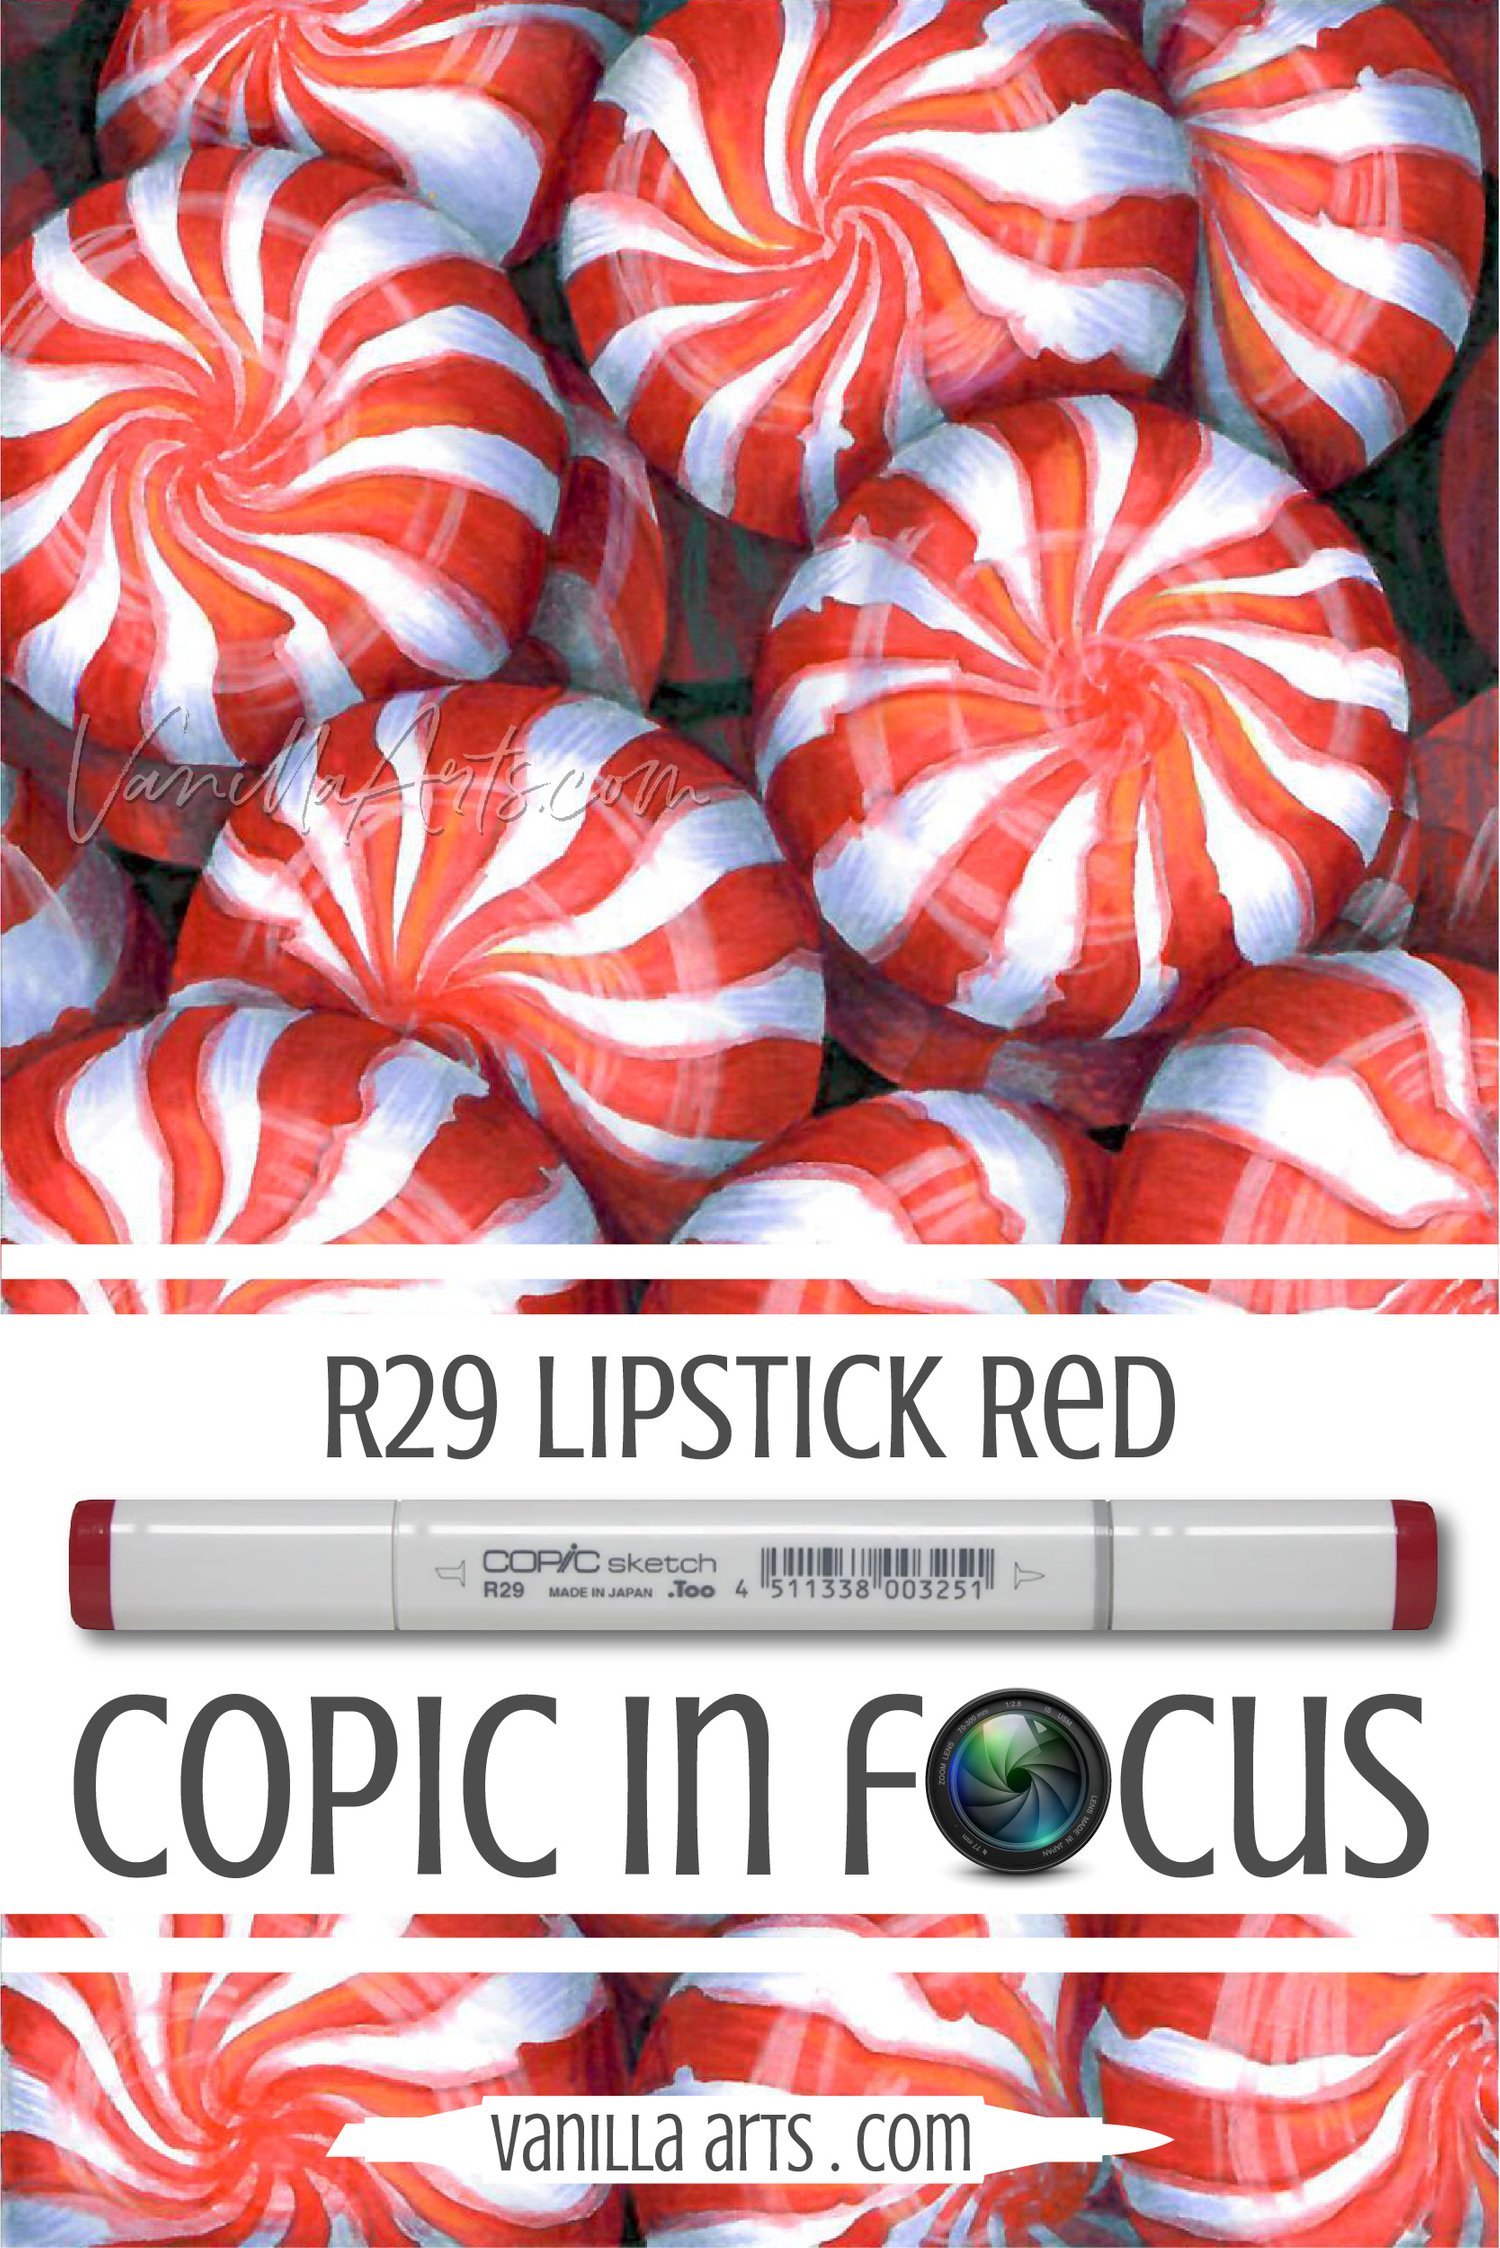 Colors in Focus: R29 “Lipstick Red” Copic Marker (Everything you need to know and more)